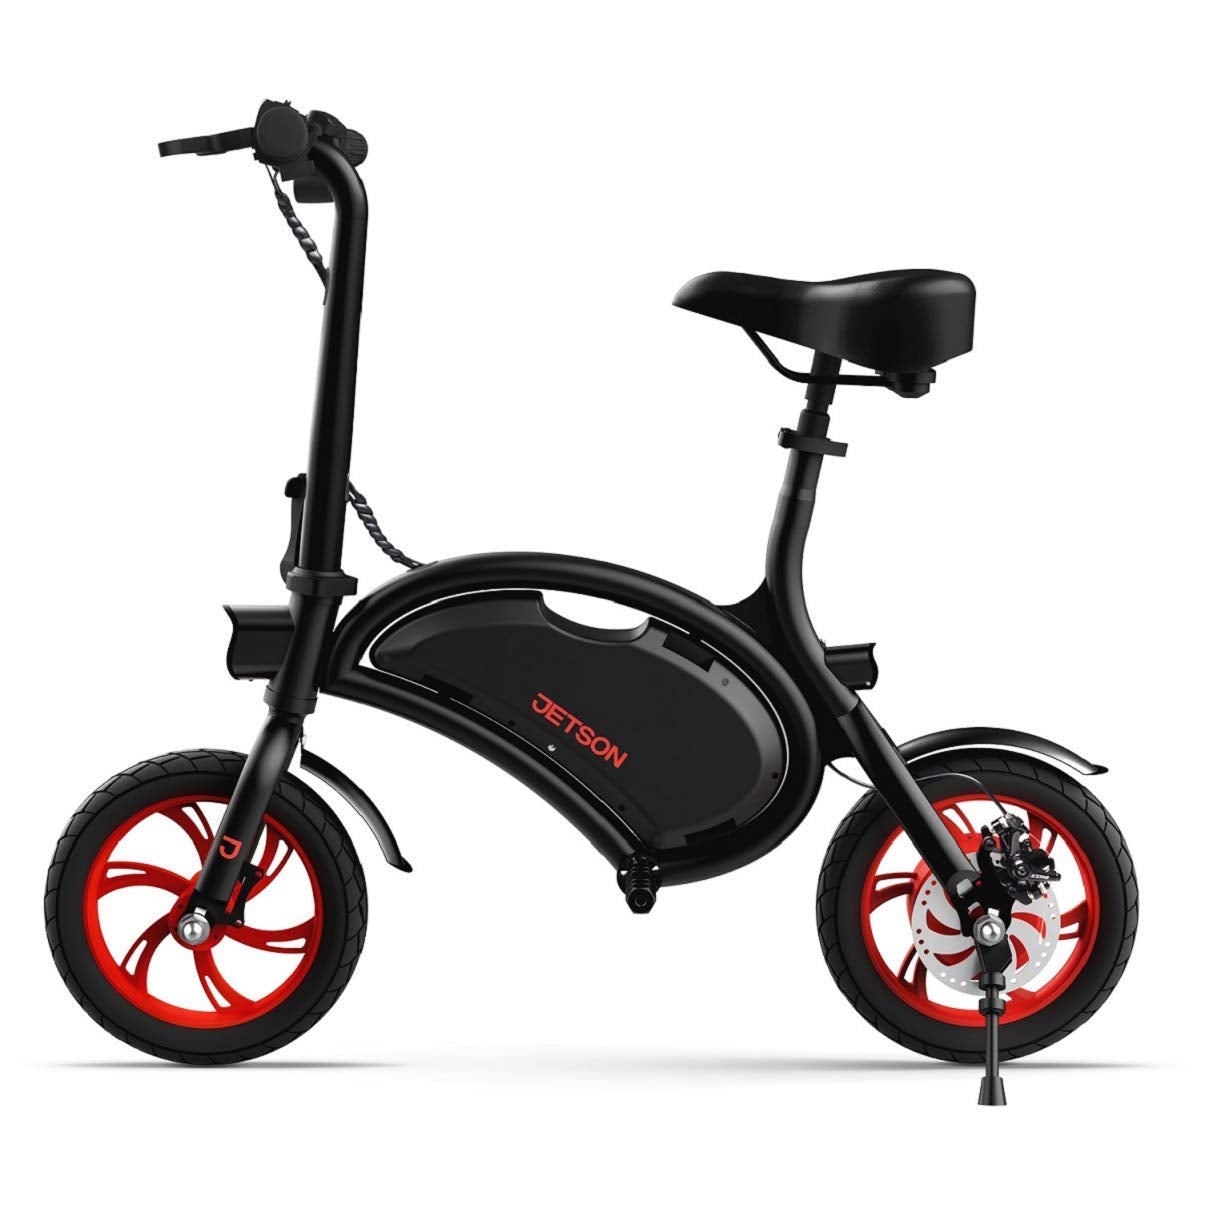 Jetson Electric Bike Bolt Folding Electric Bike, Black - with LCD Display, Lightweight & Portable with Carrying Handle, Travel Up to 15 Miles, Max Speed Up to 15.5 MPH , 40" x 20" x 37" - Home Decor Gifts and More